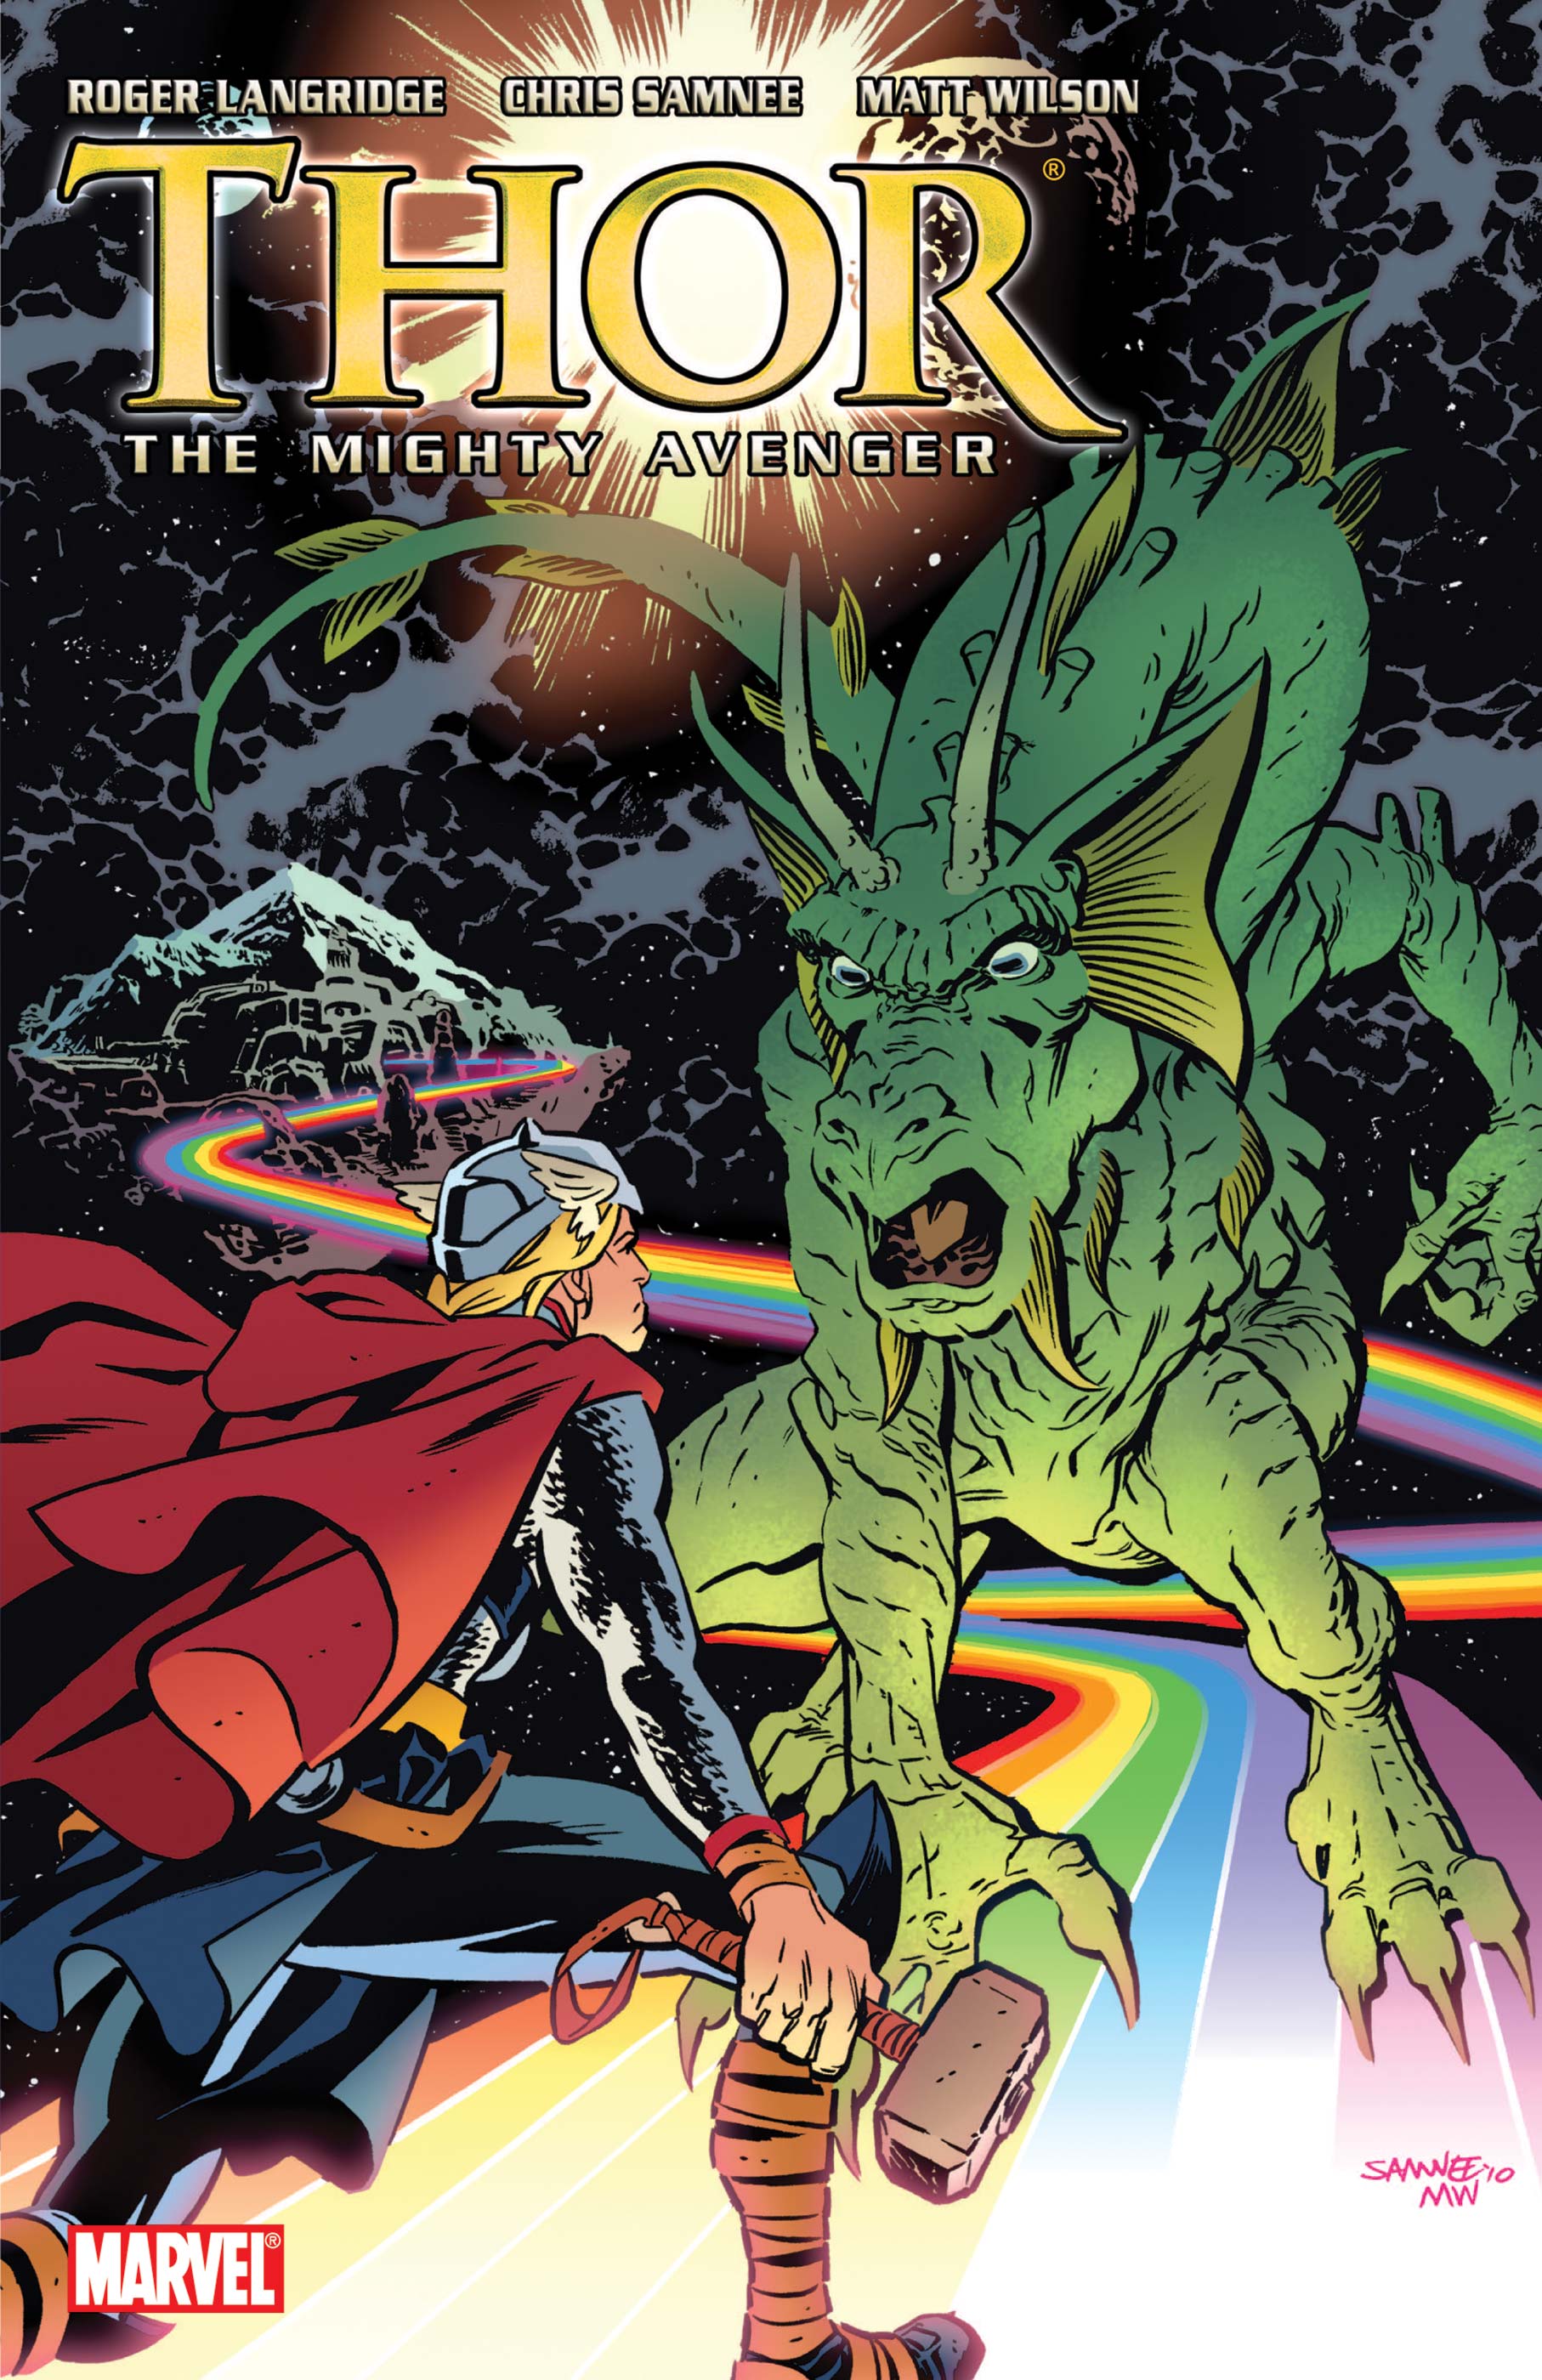 THOR THE MIGHTY AVENGER VOL. 2 GN-TPB (Trade Paperback)